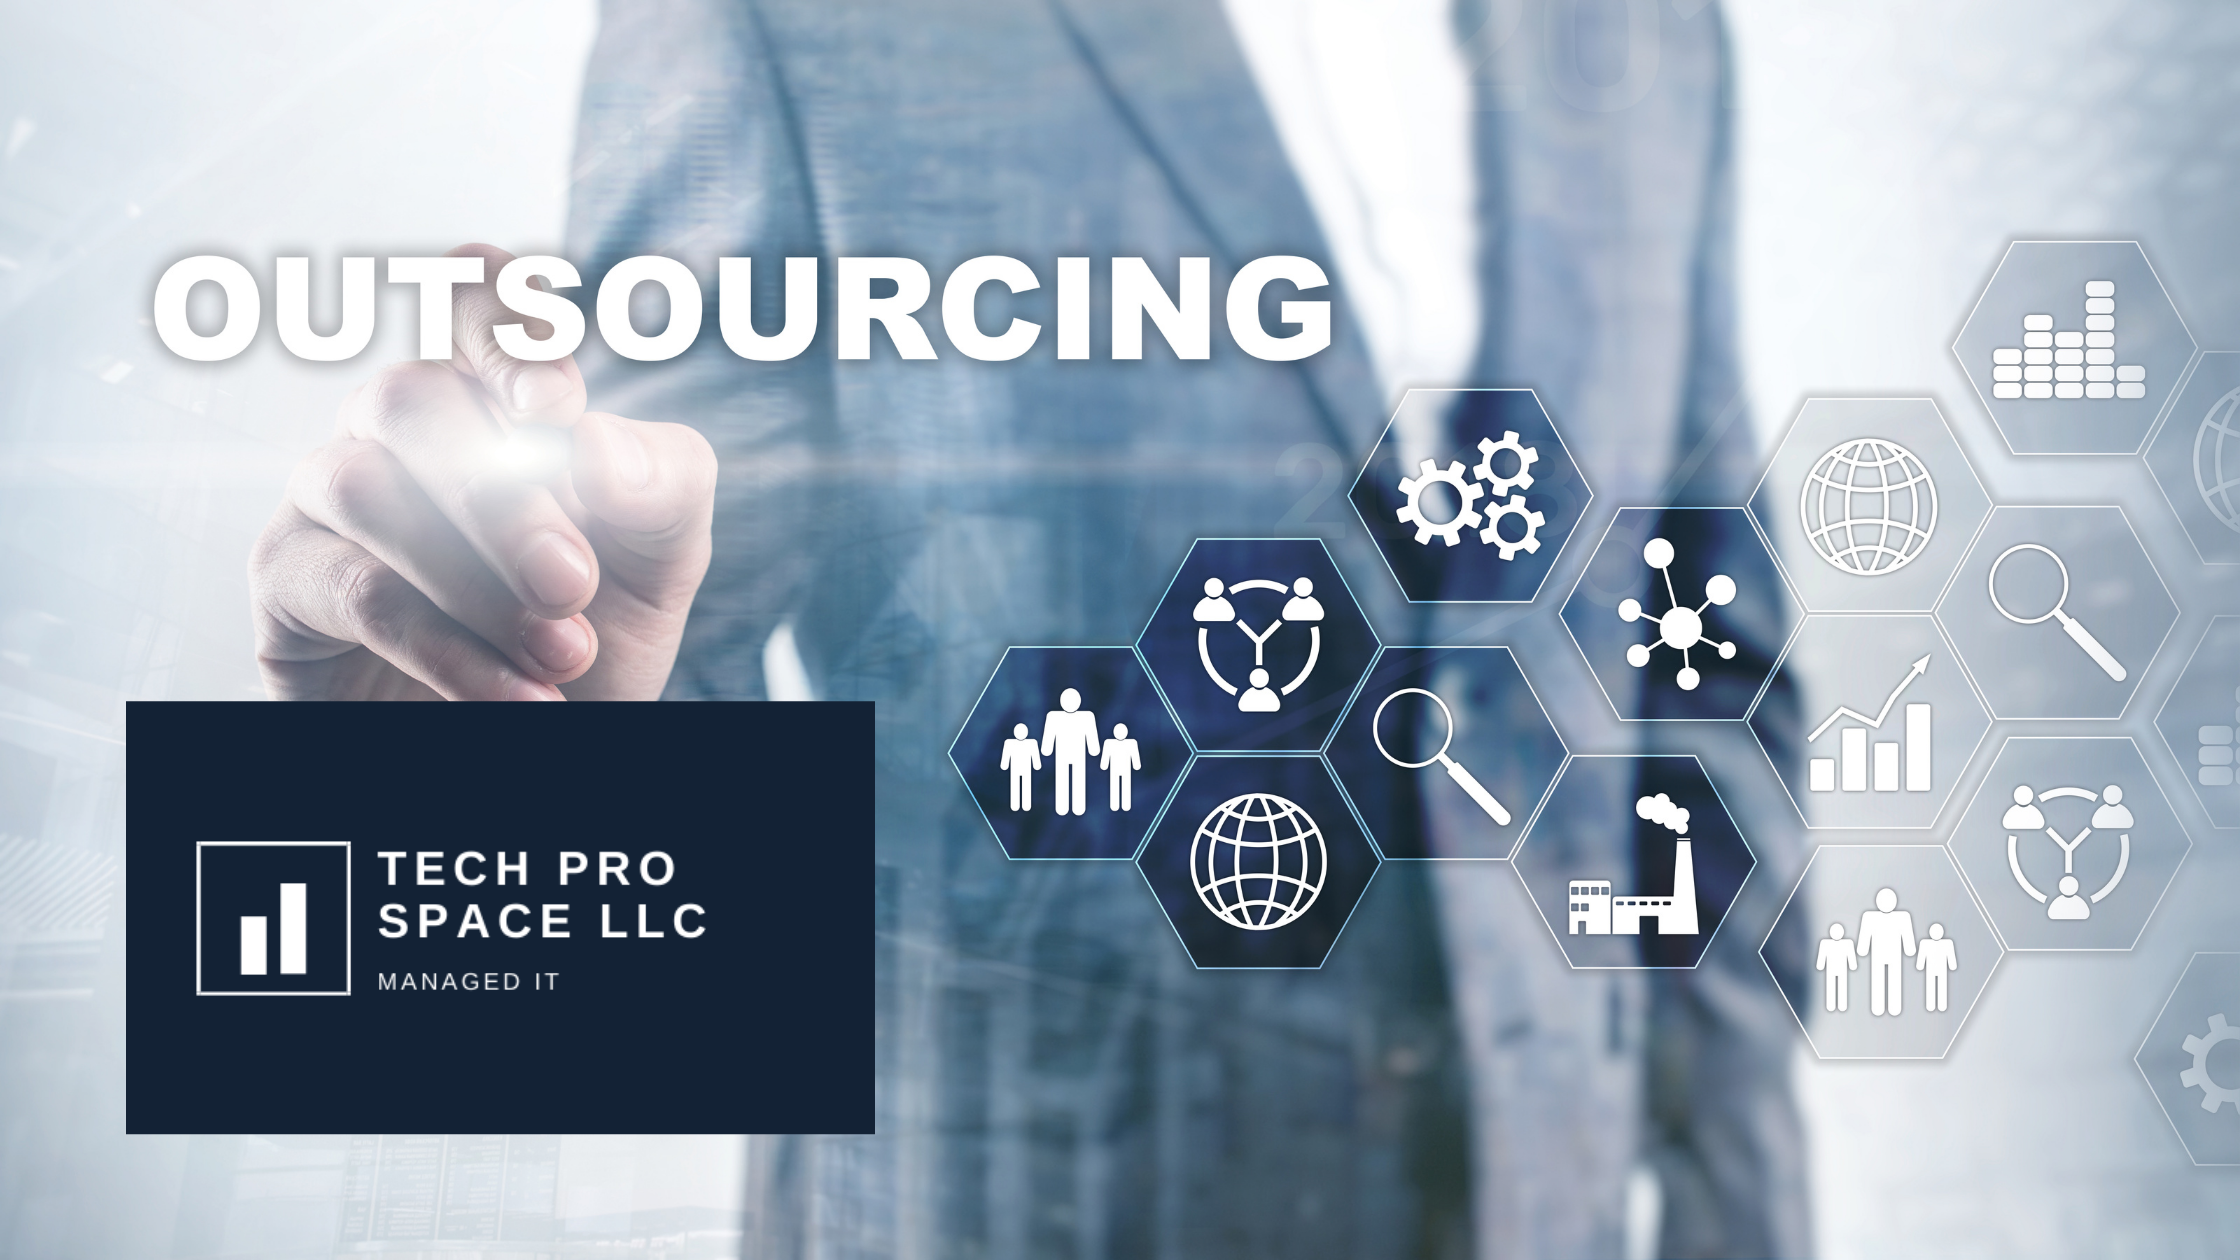 Every small business needs to outsource IT